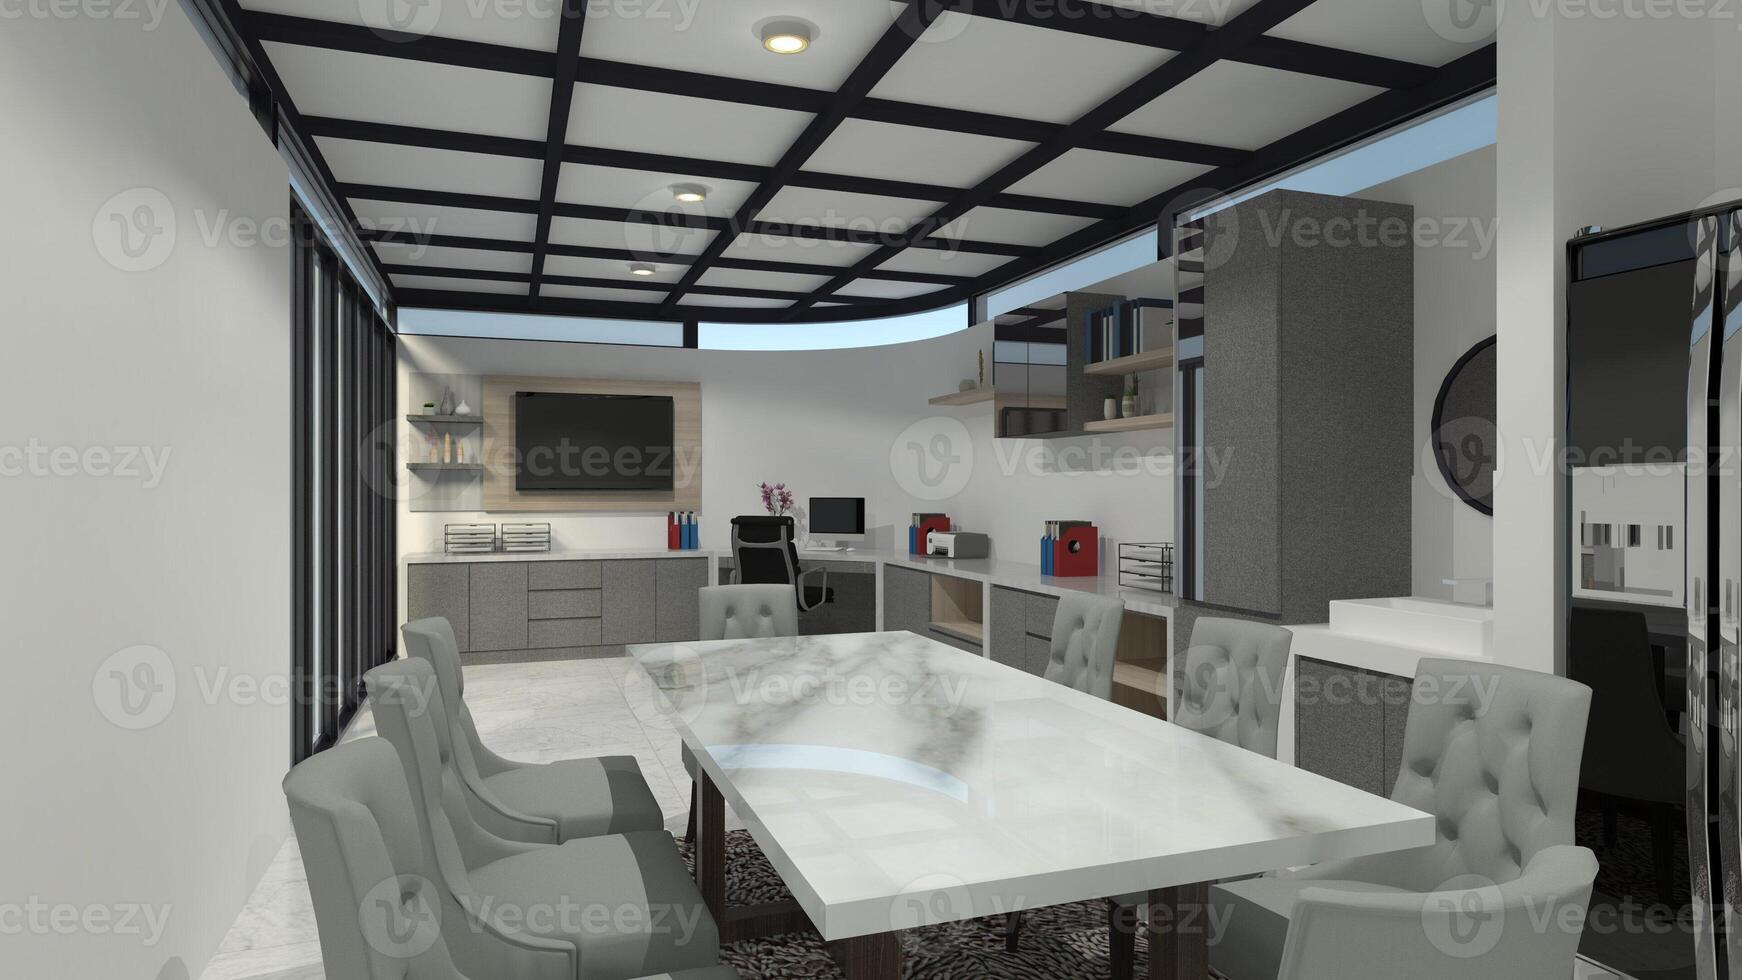 Luxury Dining Room Design Integrate with Workspace Area, 3D Illustration photo